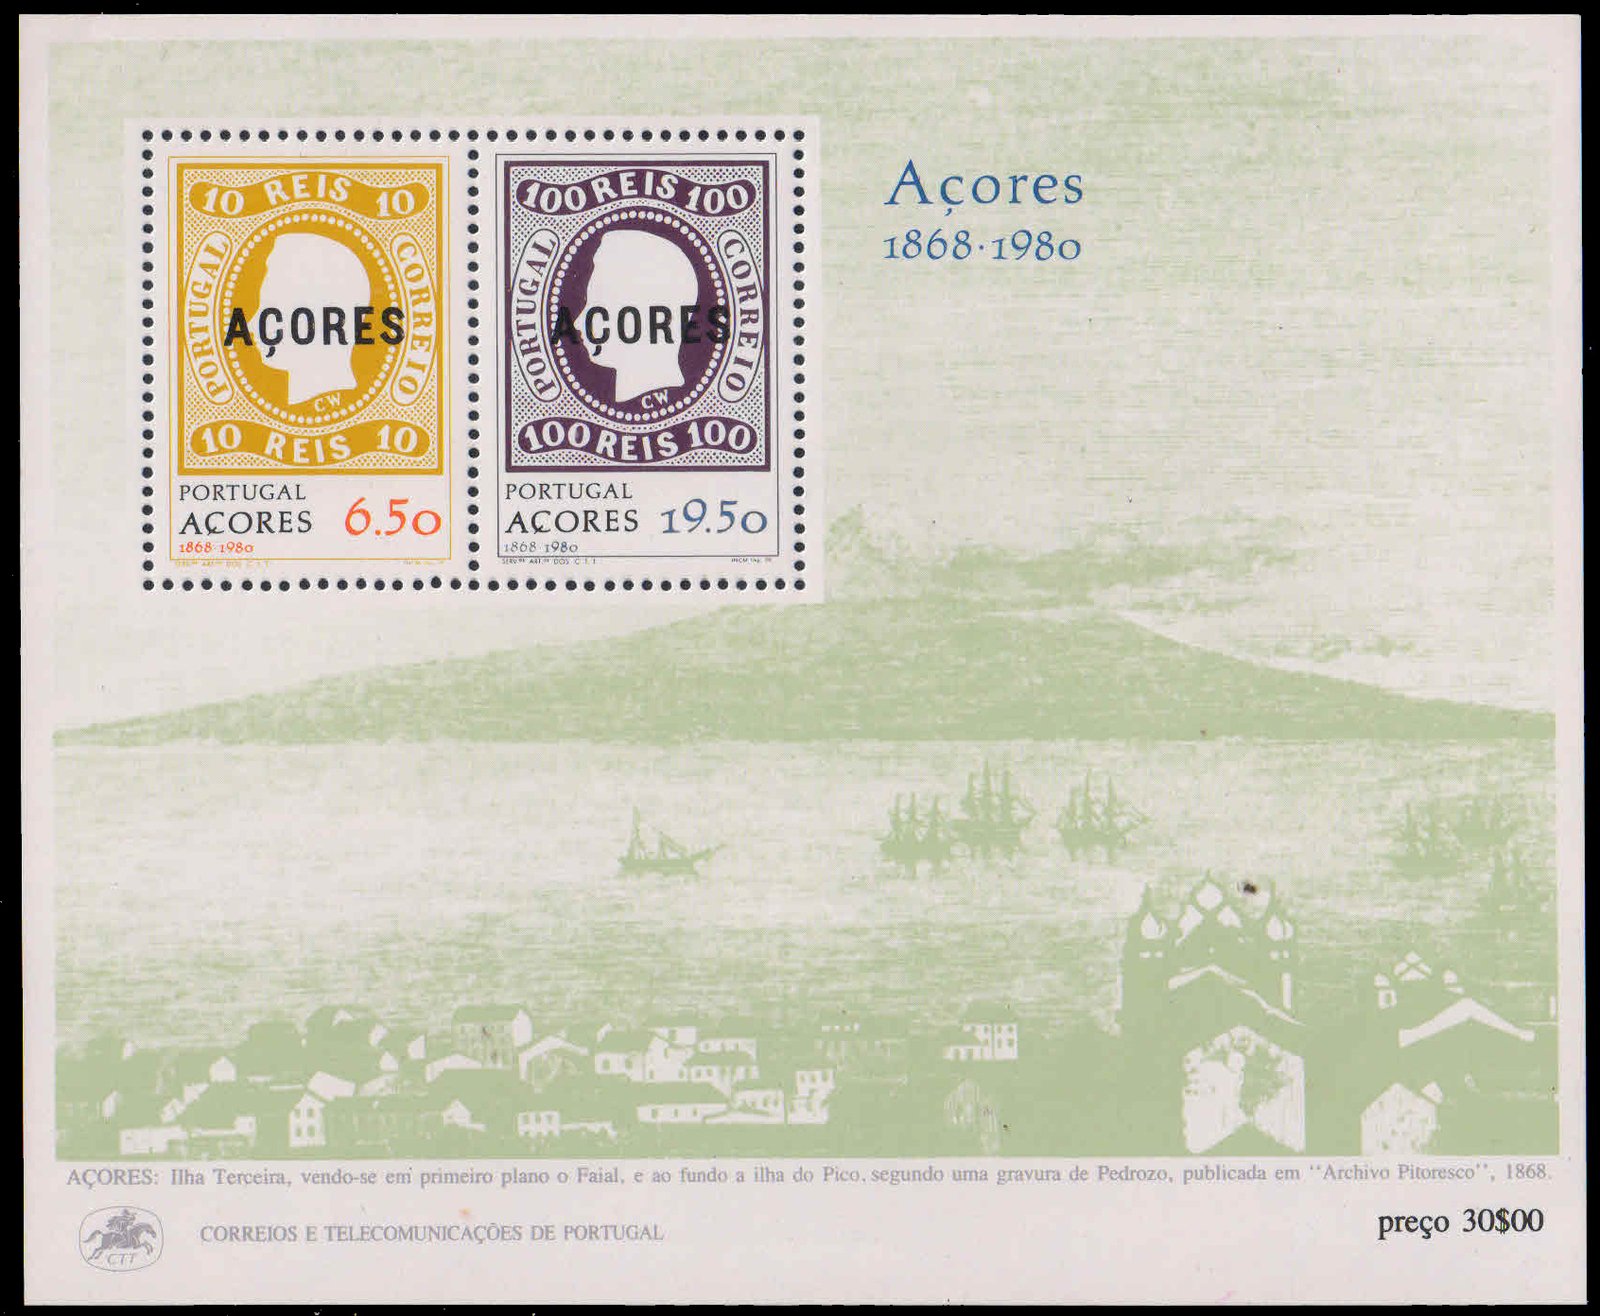 Azores 1980, 112th Anniv. of First Azores Stamps, Stamp on Stamp - 10 Pies Stamp of 1868, S.G.No MS 418